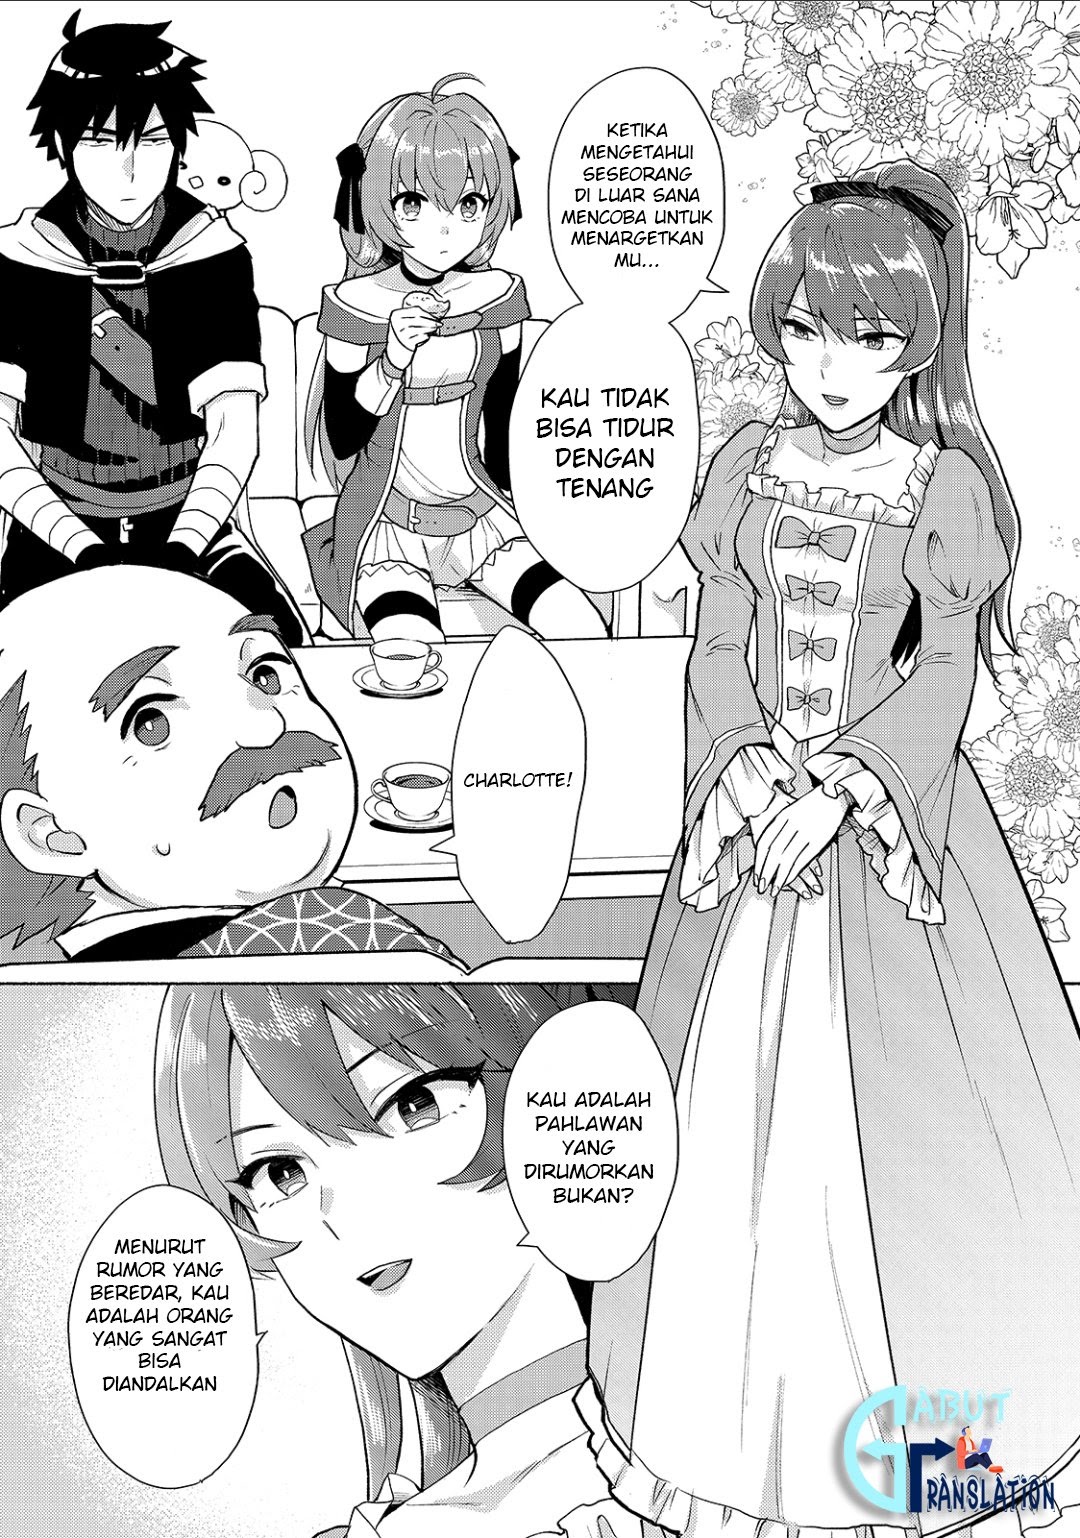 Dilarang COPAS - situs resmi www.mangacanblog.com - Komik when i was reincarnated in another world i was a heroine and he was a hero 010 - chapter 10 11 Indonesia when i was reincarnated in another world i was a heroine and he was a hero 010 - chapter 10 Terbaru 6|Baca Manga Komik Indonesia|Mangacan